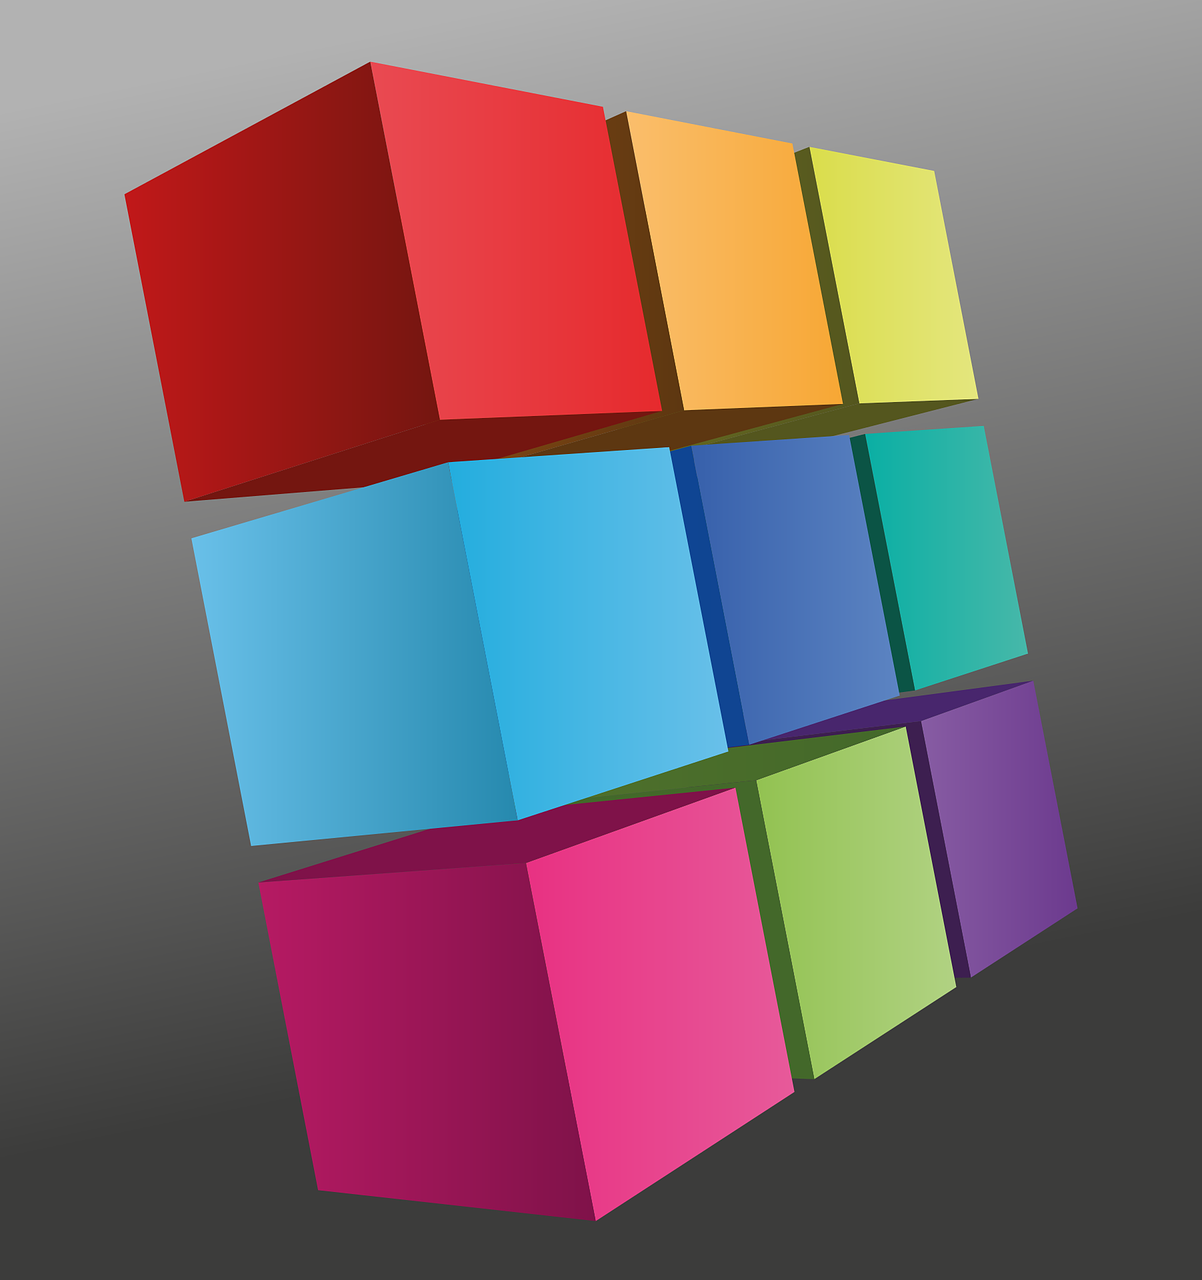 a bunch of colorful cubes stacked on top of each other, a computer rendering, polycount, illustrator vector graphics, on a gray background, panels, set photo